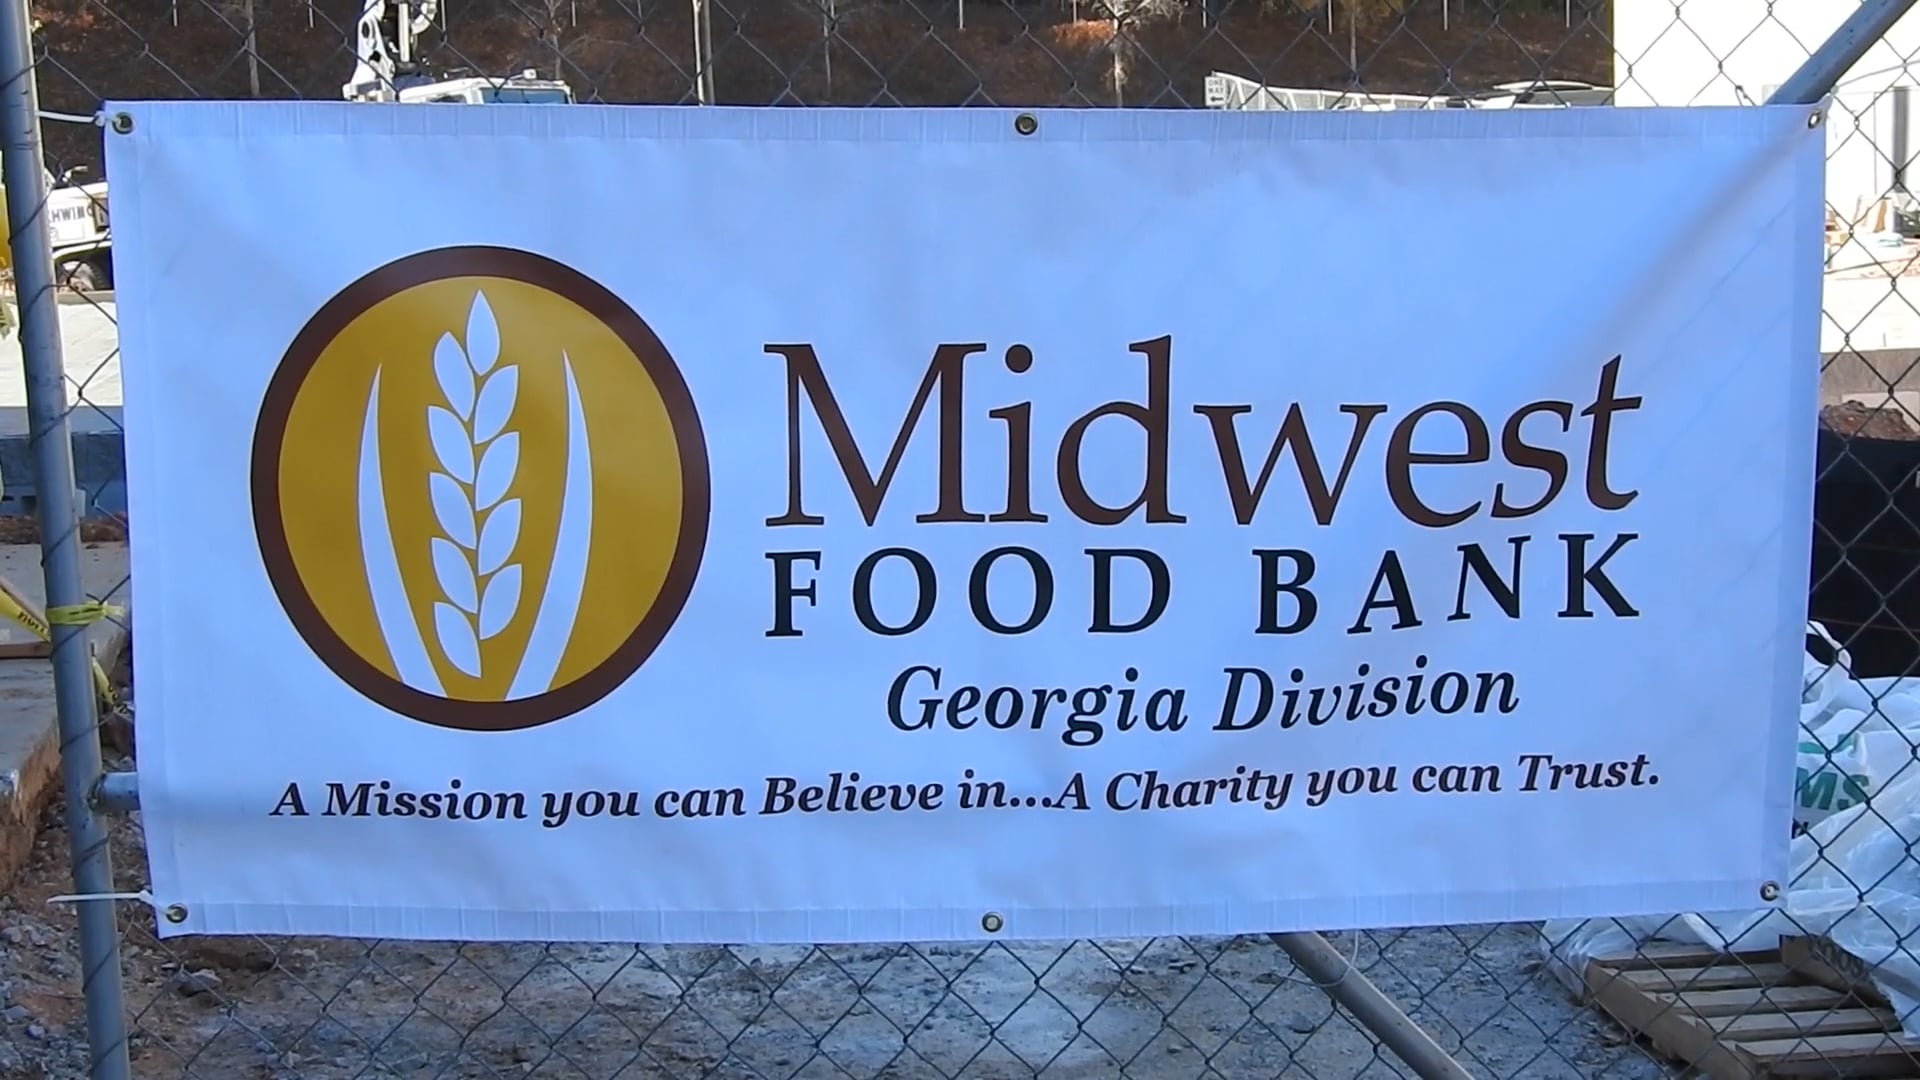 Midwest Food Bank Division on Vimeo